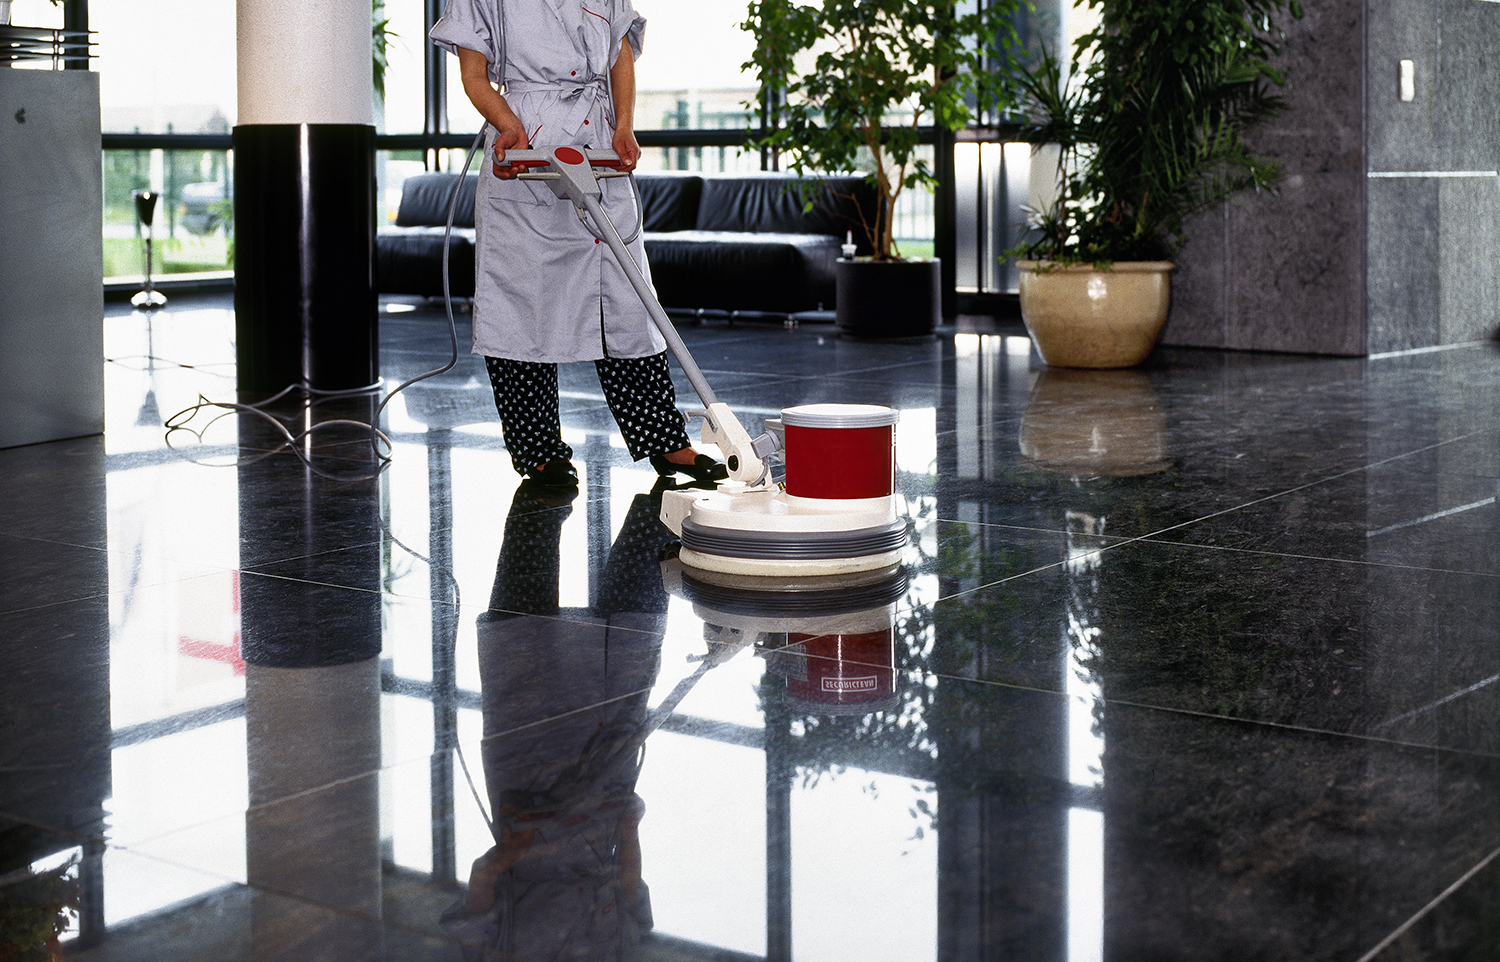 Adult cleaner maid woman with uniform cleaning corridor pass floor